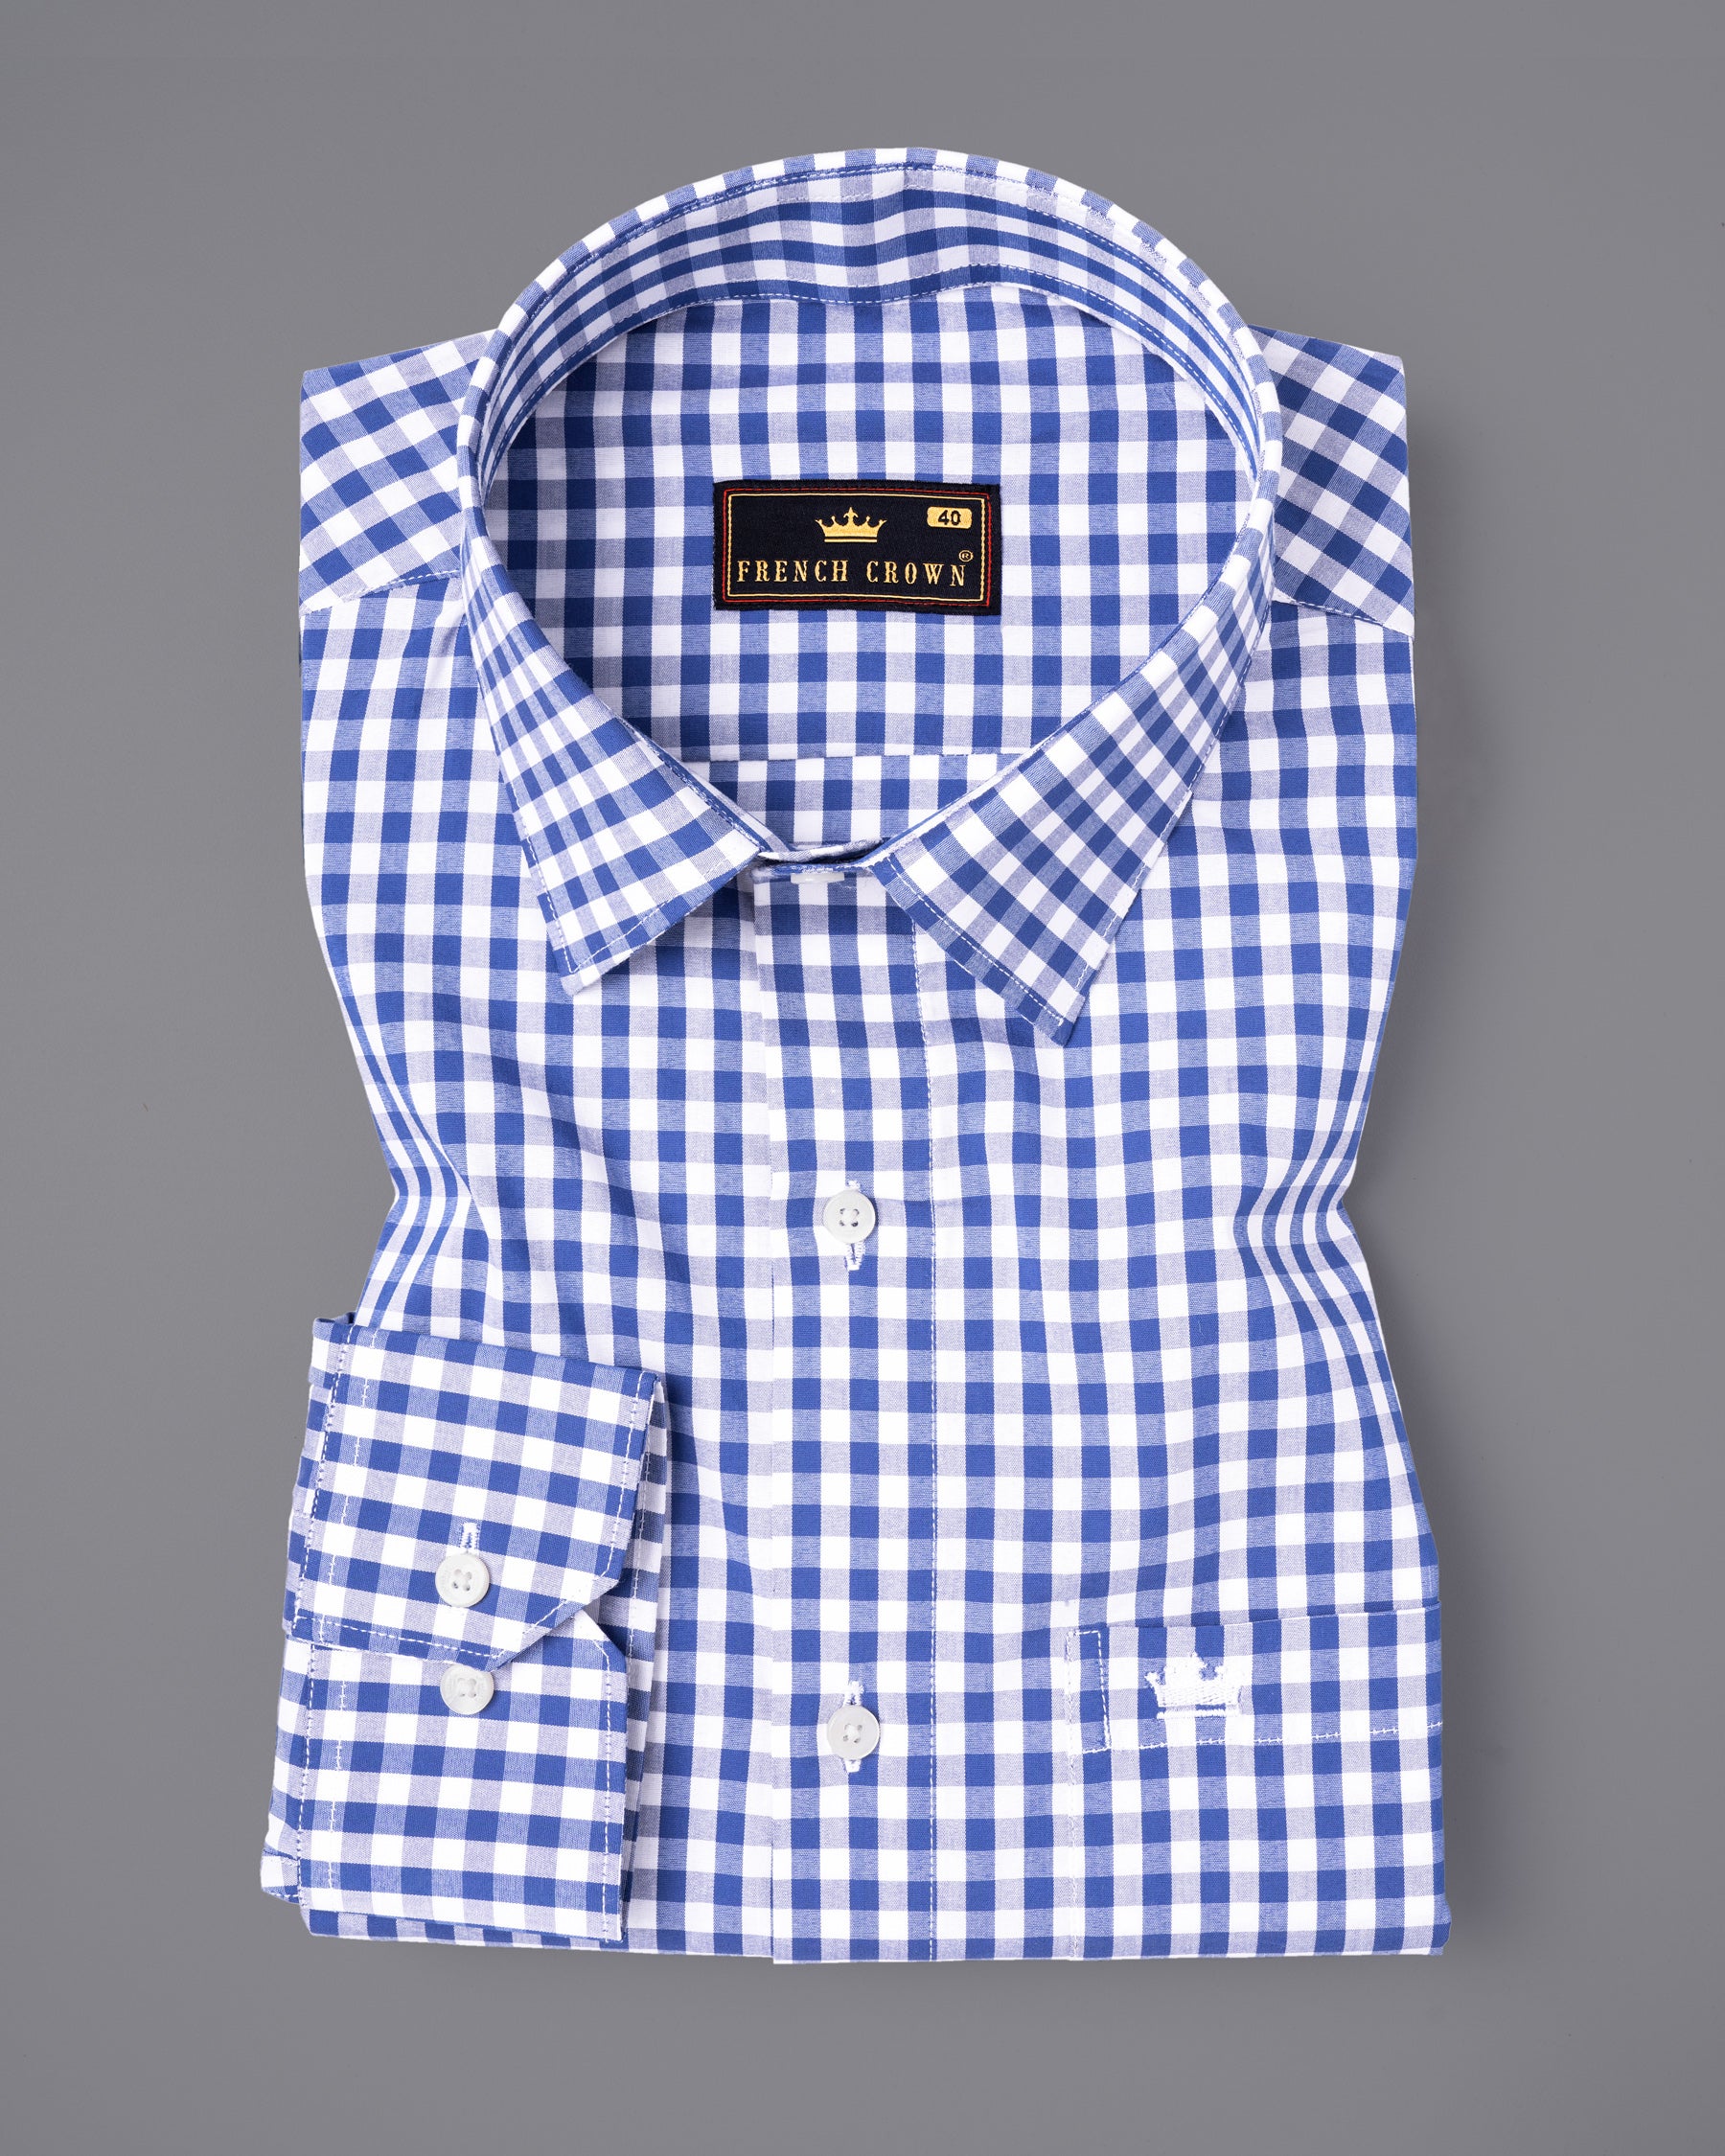 Blue with White Gingham checked Premium Cotton shirt 4978-38,4978-H-38,4978-39,4978-H-39,4978-40,4978-H-40,4978-42,4978-H-42,4978-44,4978-H-44,4978-46,4978-H-46,4978-48,4978-H-48,4978-50,4978-H-50,4978-52,4978-H-52